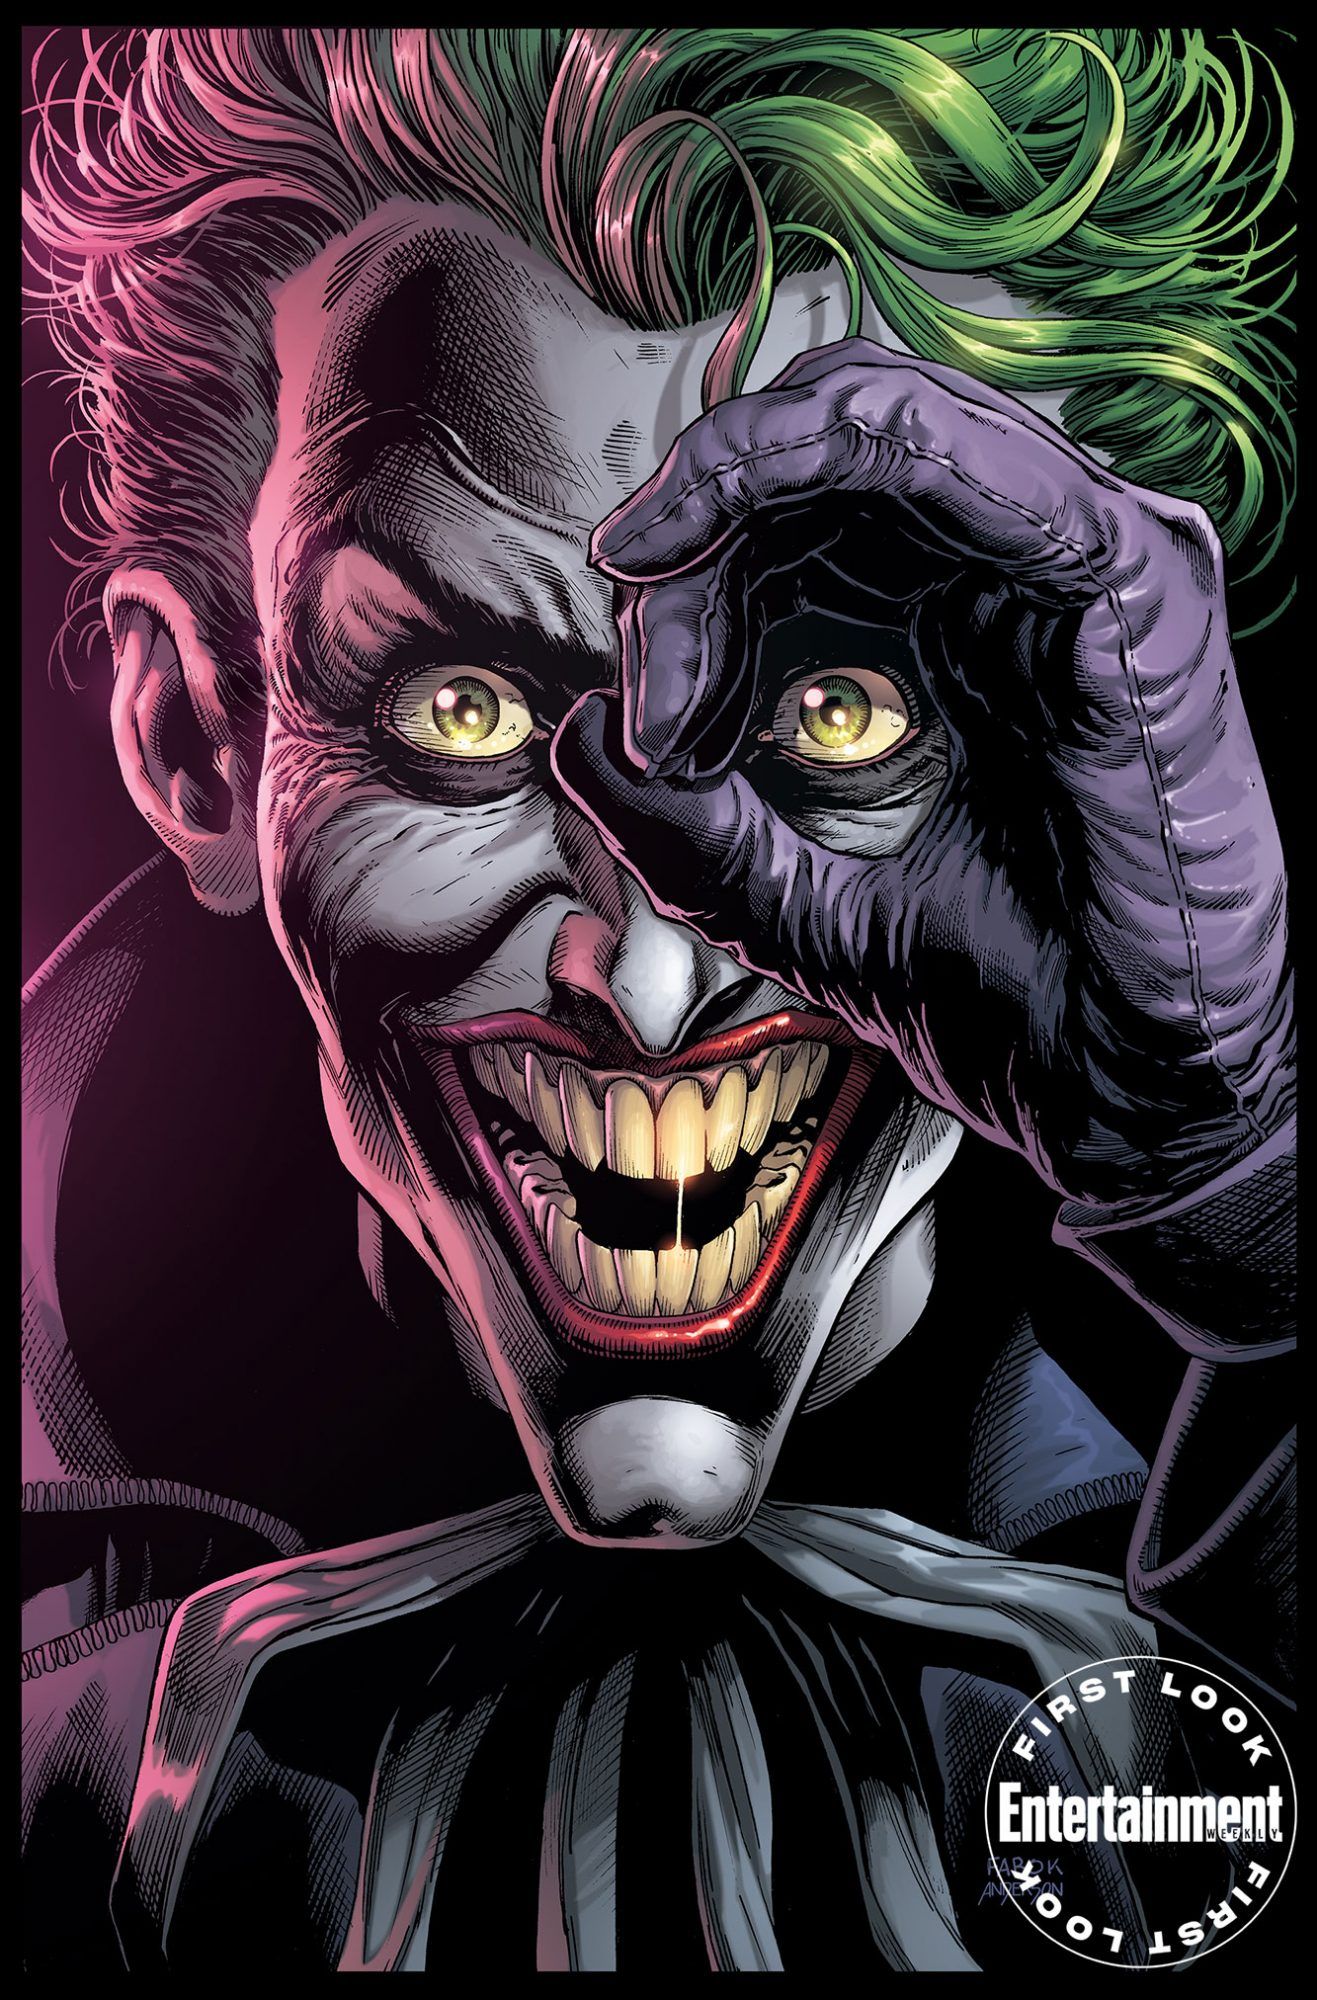 Three Jokers is Going to Change The Batman Villain Forever